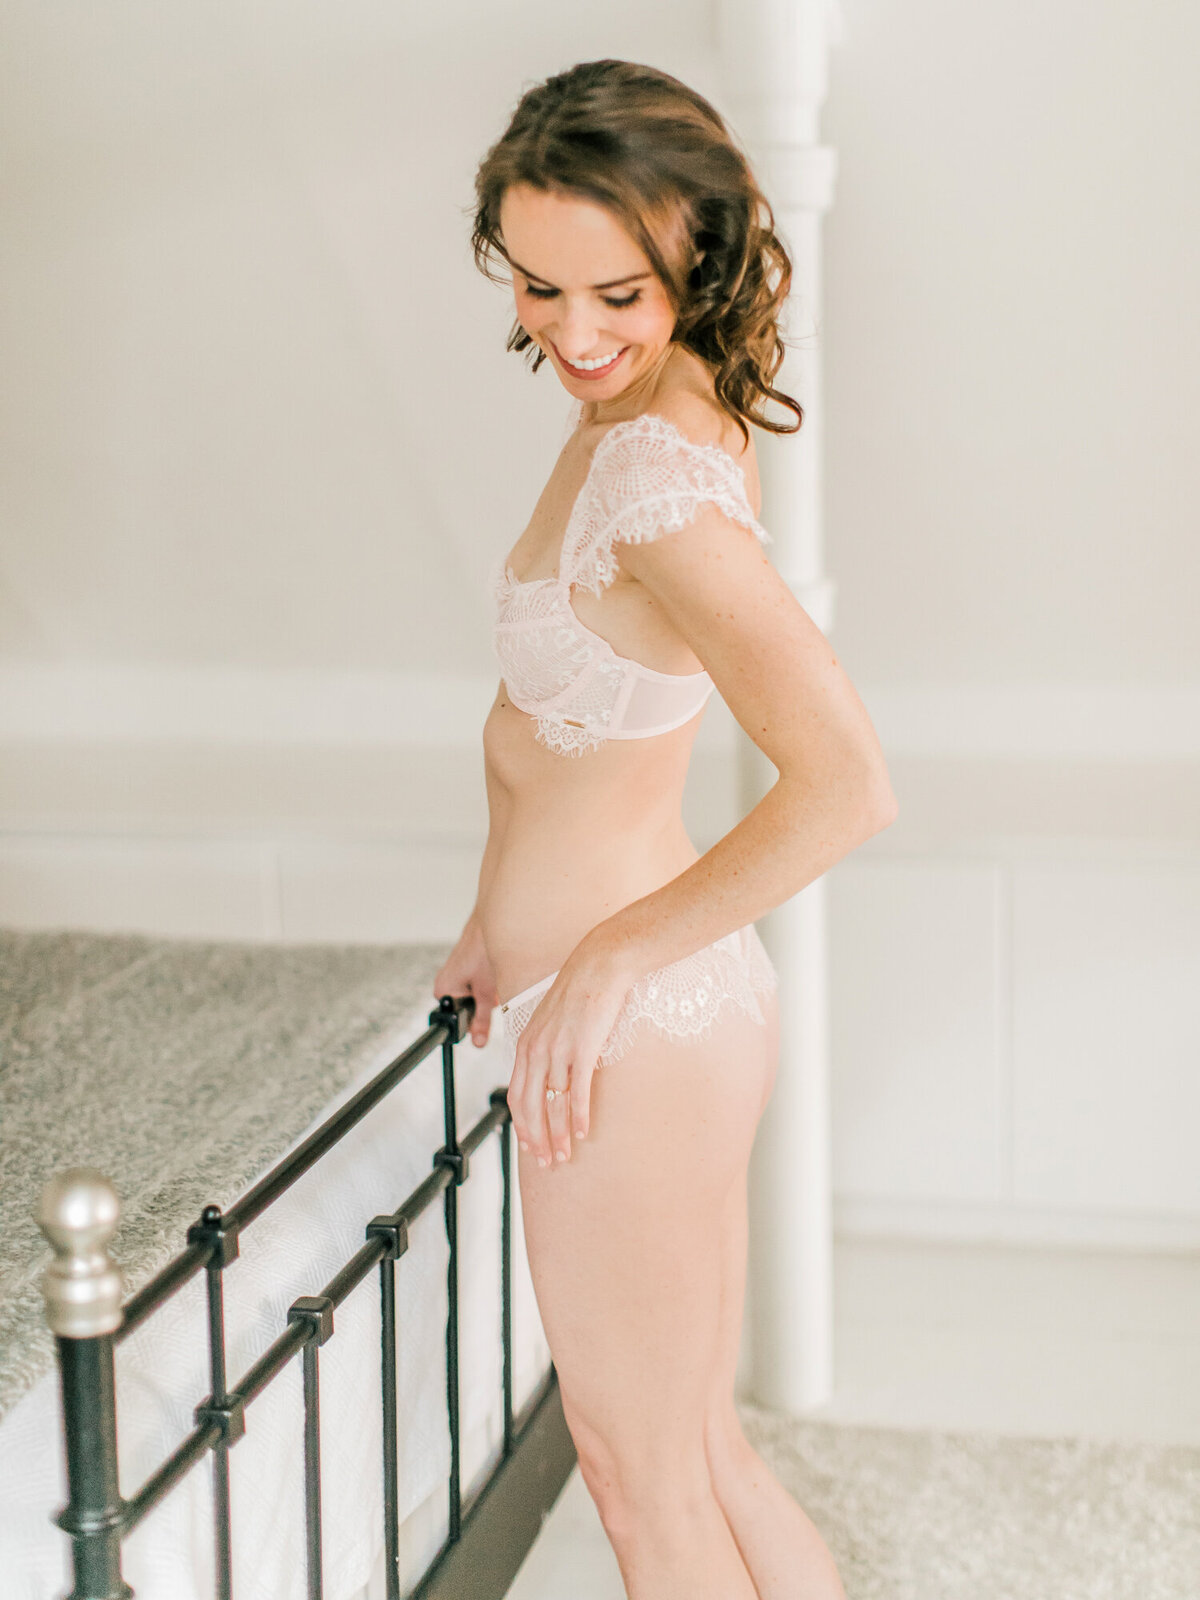 A happy candid moment during a boudoir photo session as the bride laughs